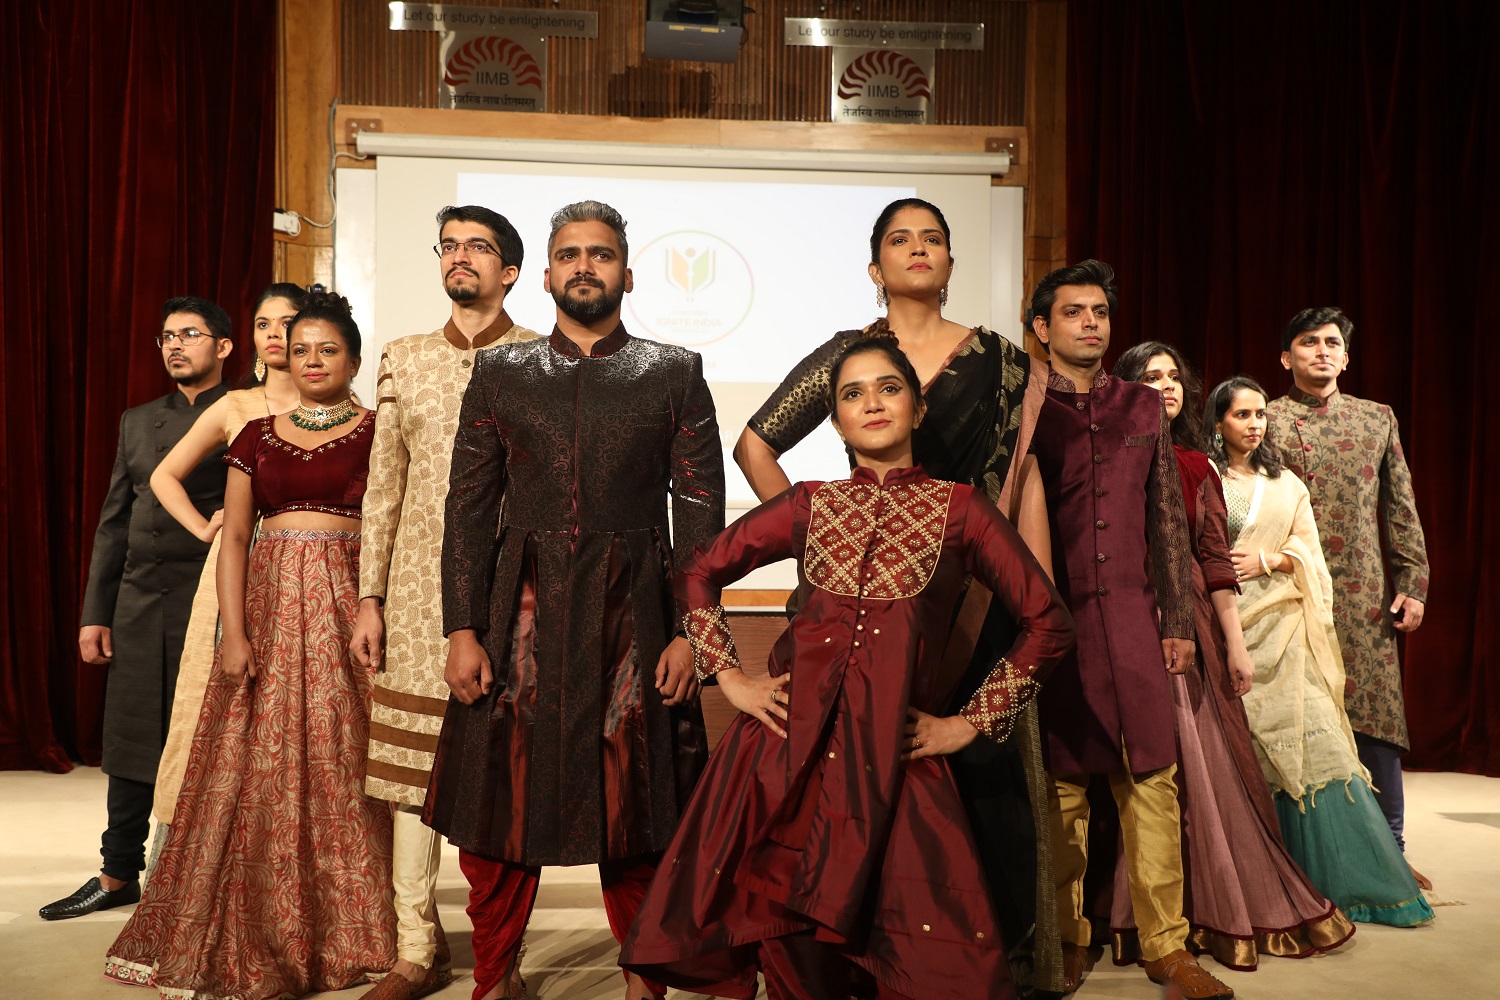 Students at Pehel 2022 showcase the creations of indigenous fashion brands such as ILK, SNOB and Rainush. The theme of the fashion show was ‘Make In India’.